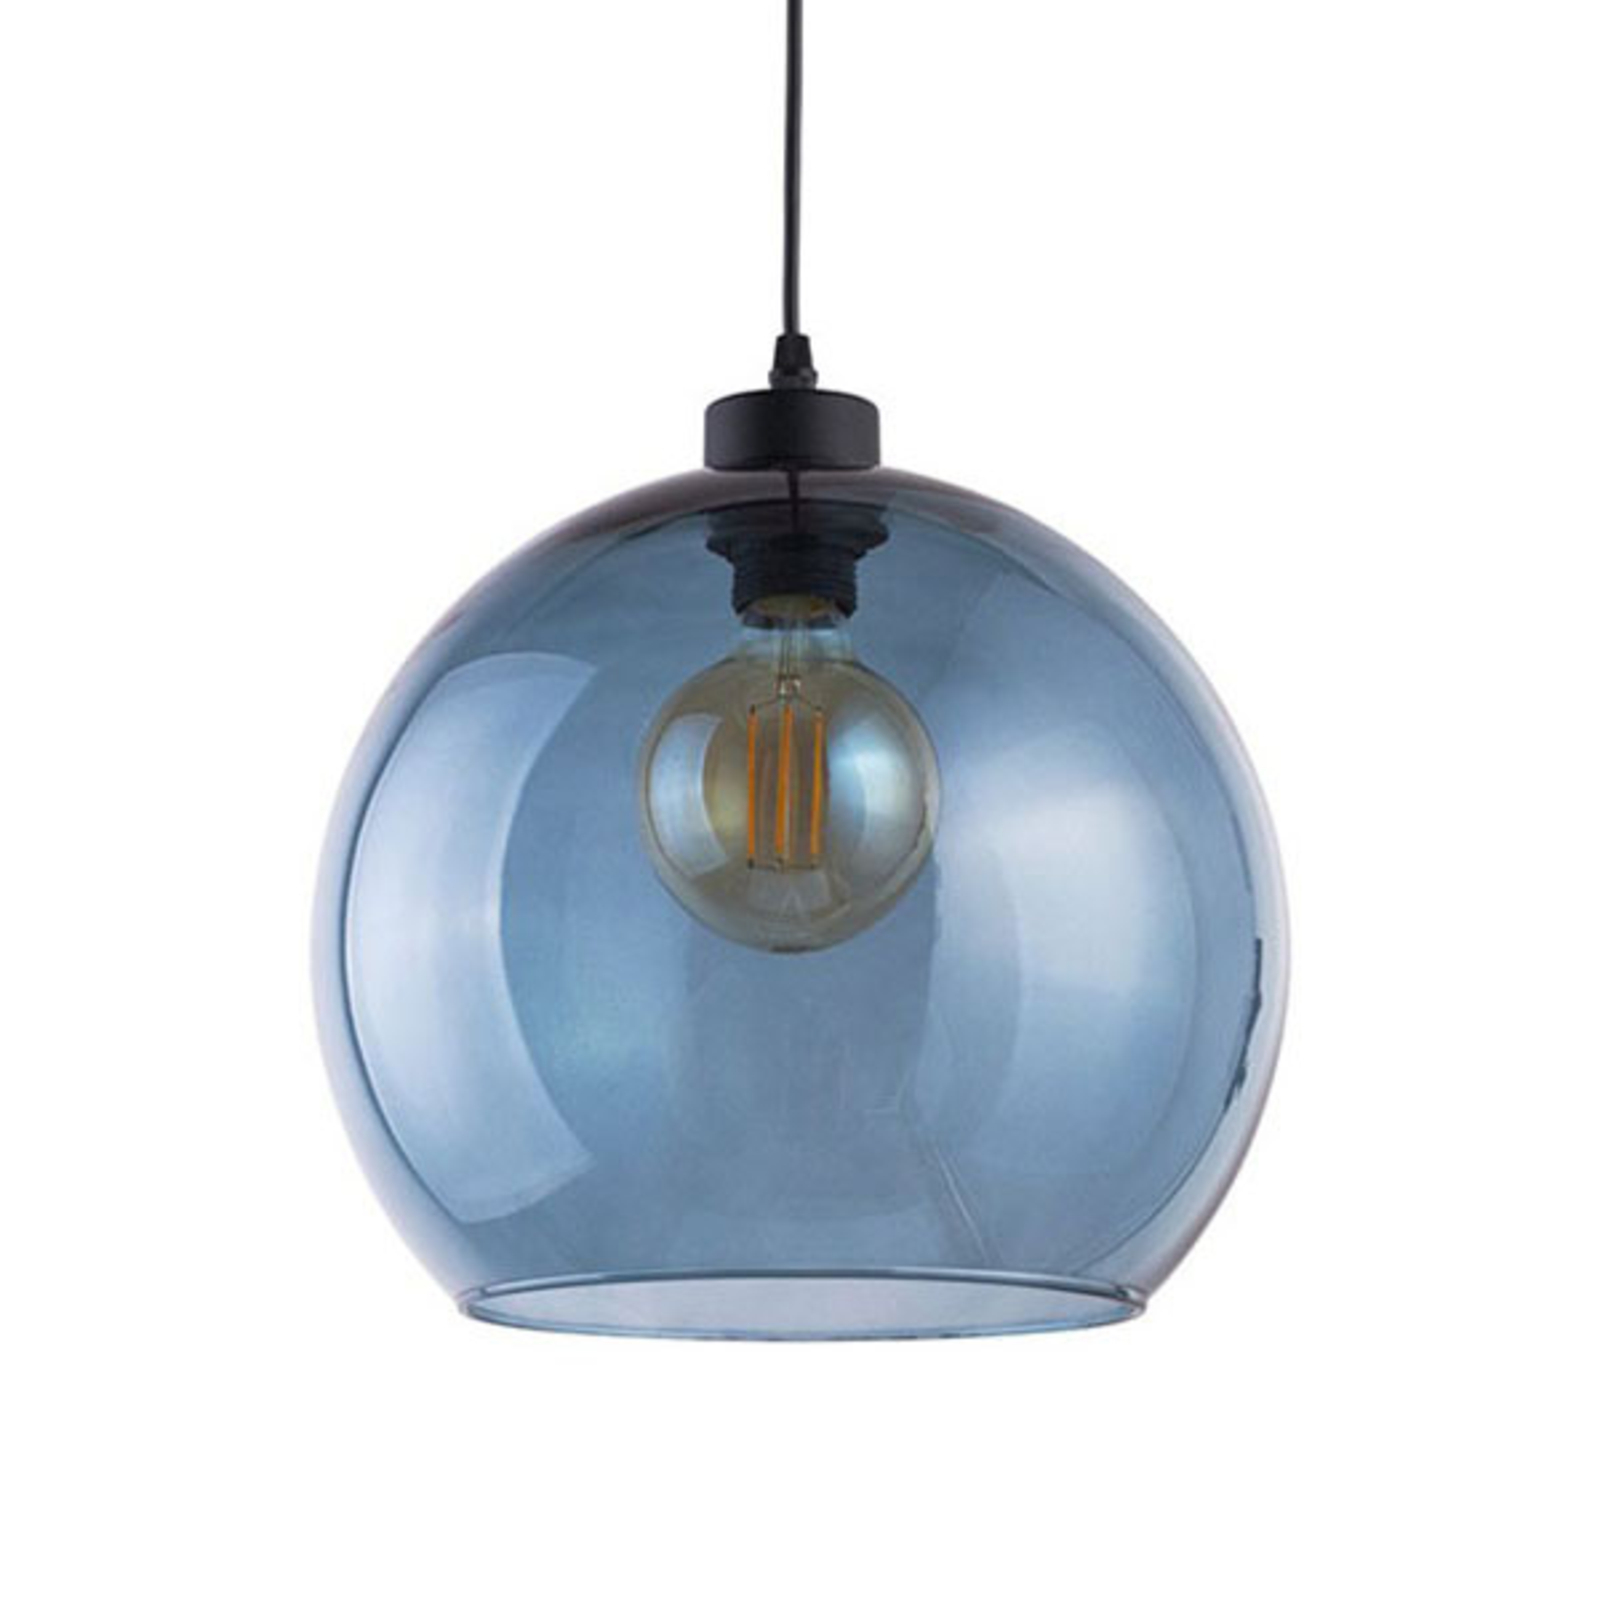 Cubus hanging light, one-bulb, blue